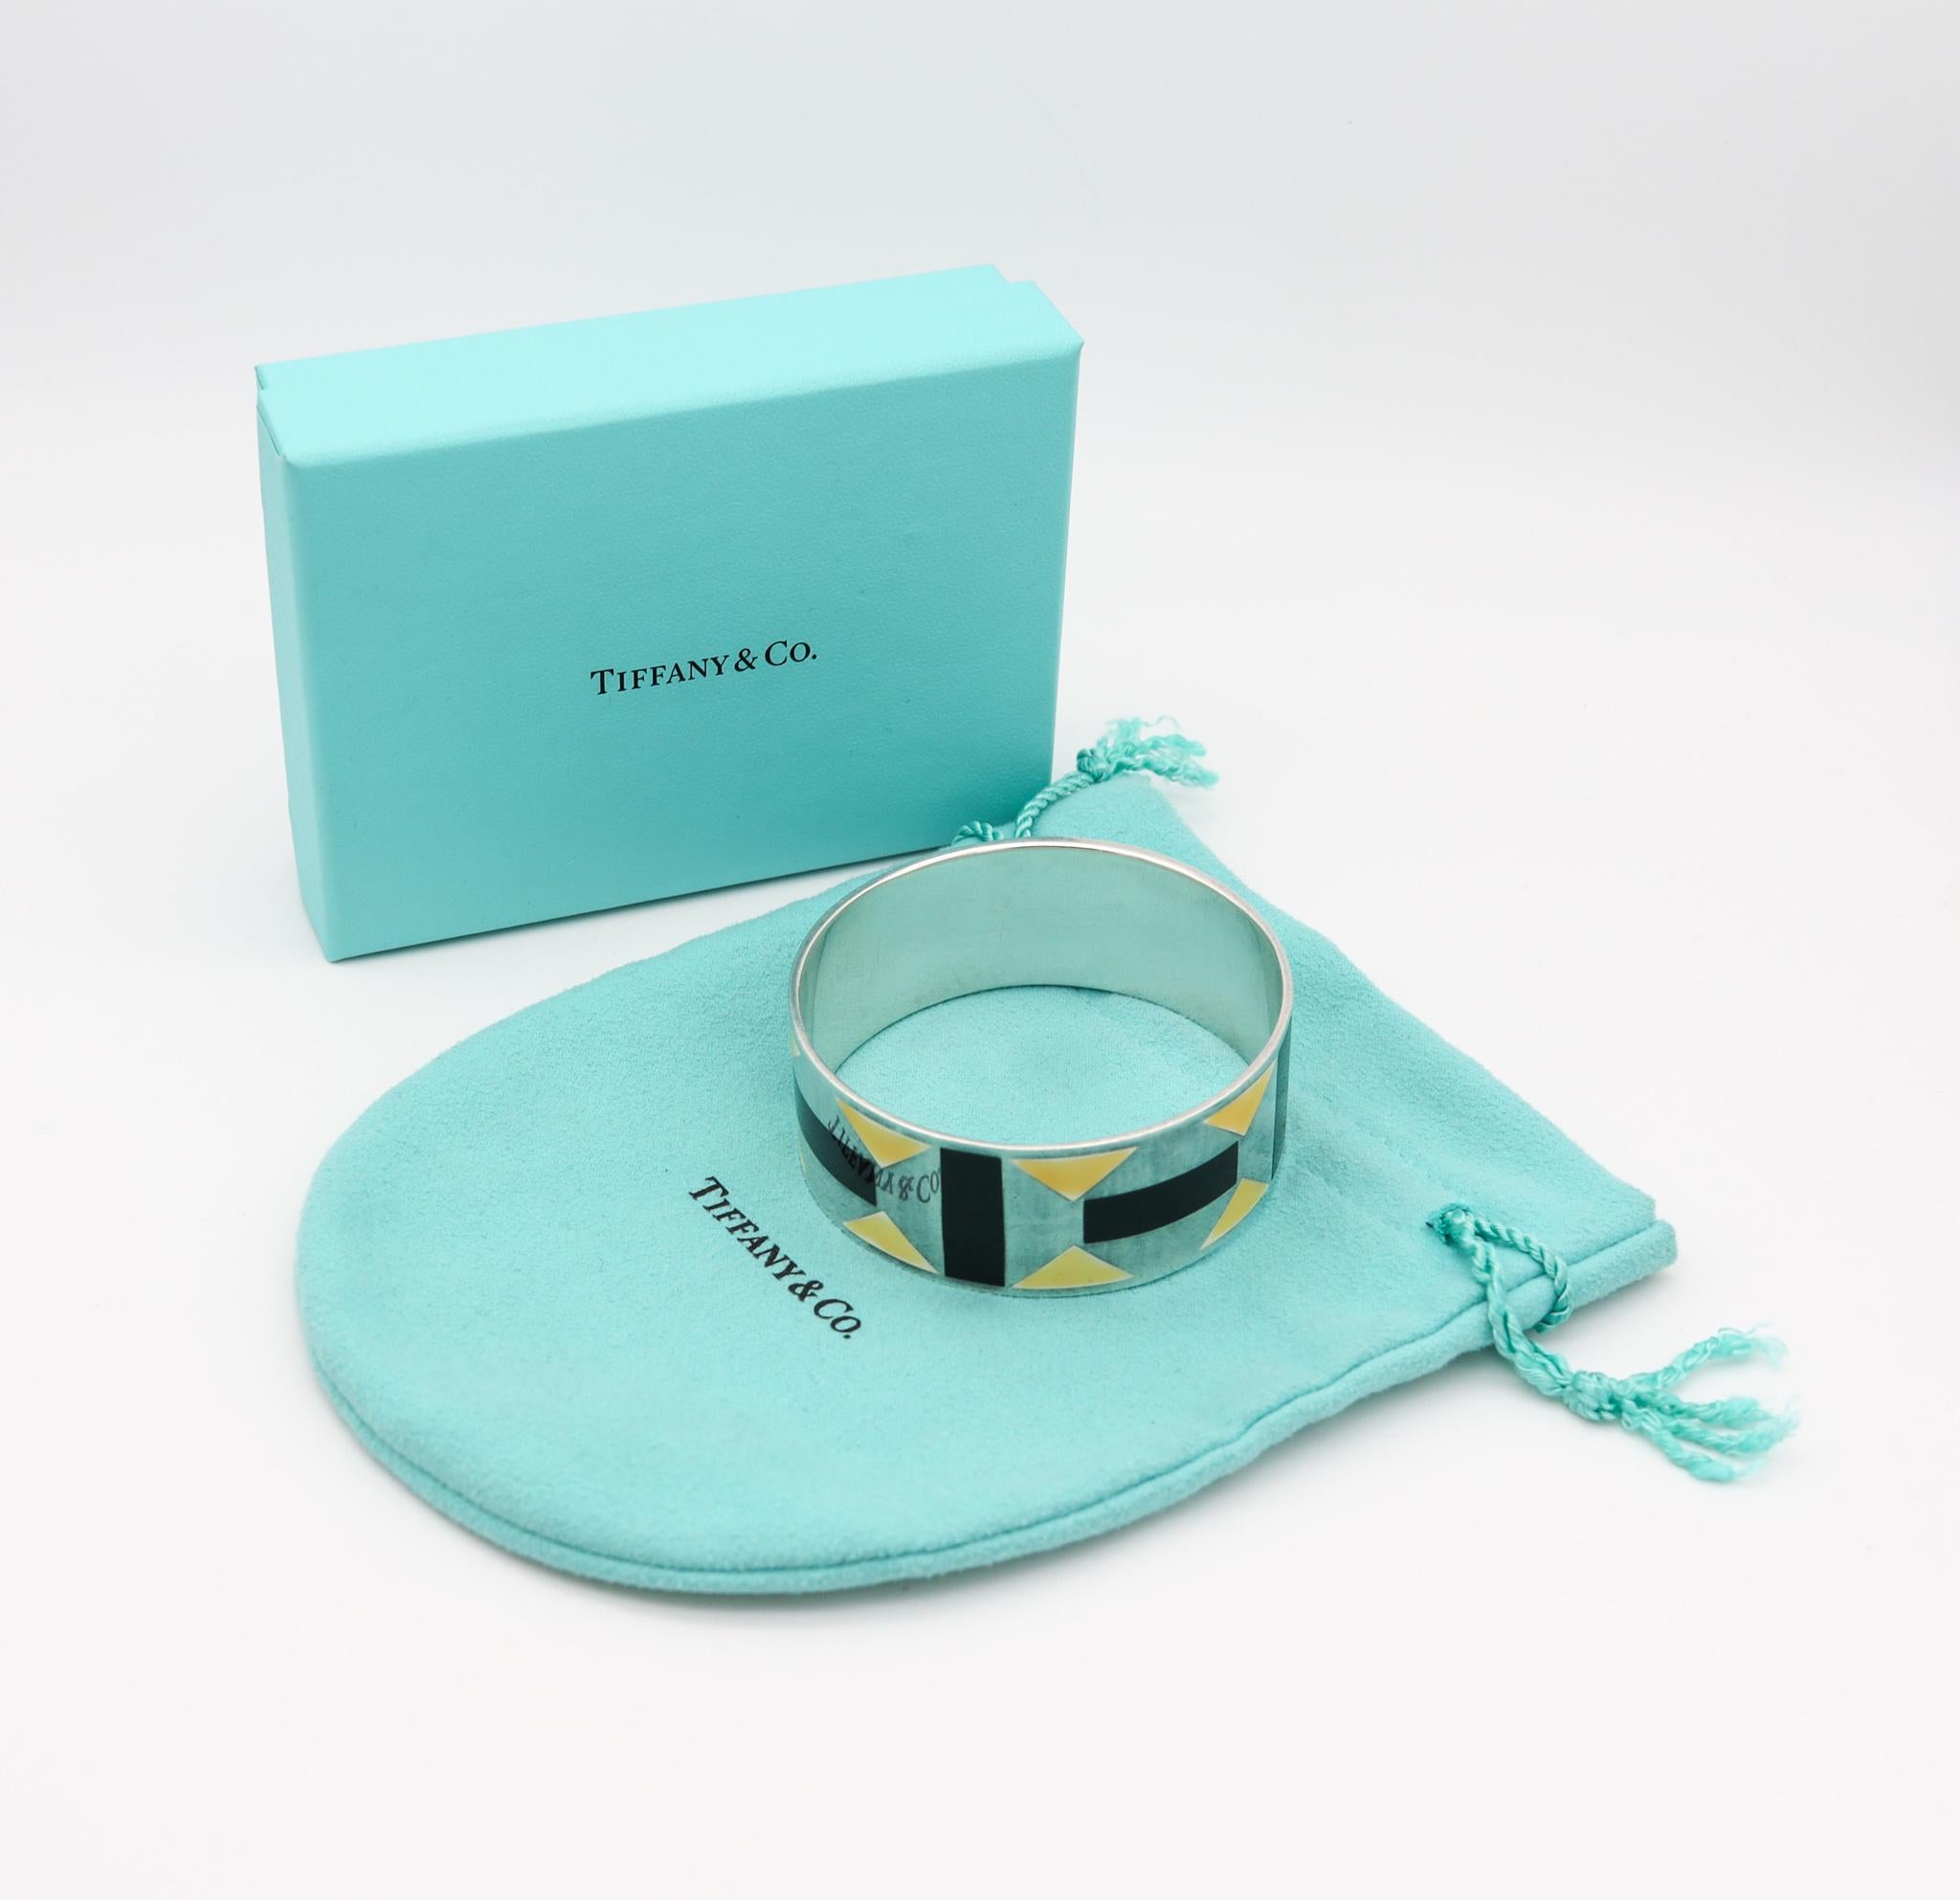 Zellige bangle designed by Paloma Picasso for Tiffany & Co.

Very rare piece from the Zellige collection, created in New York city by Paloma Picasso at the Tiffany Studios, back in the 1989. This geometric art-deco inspired bangle bracelet has been